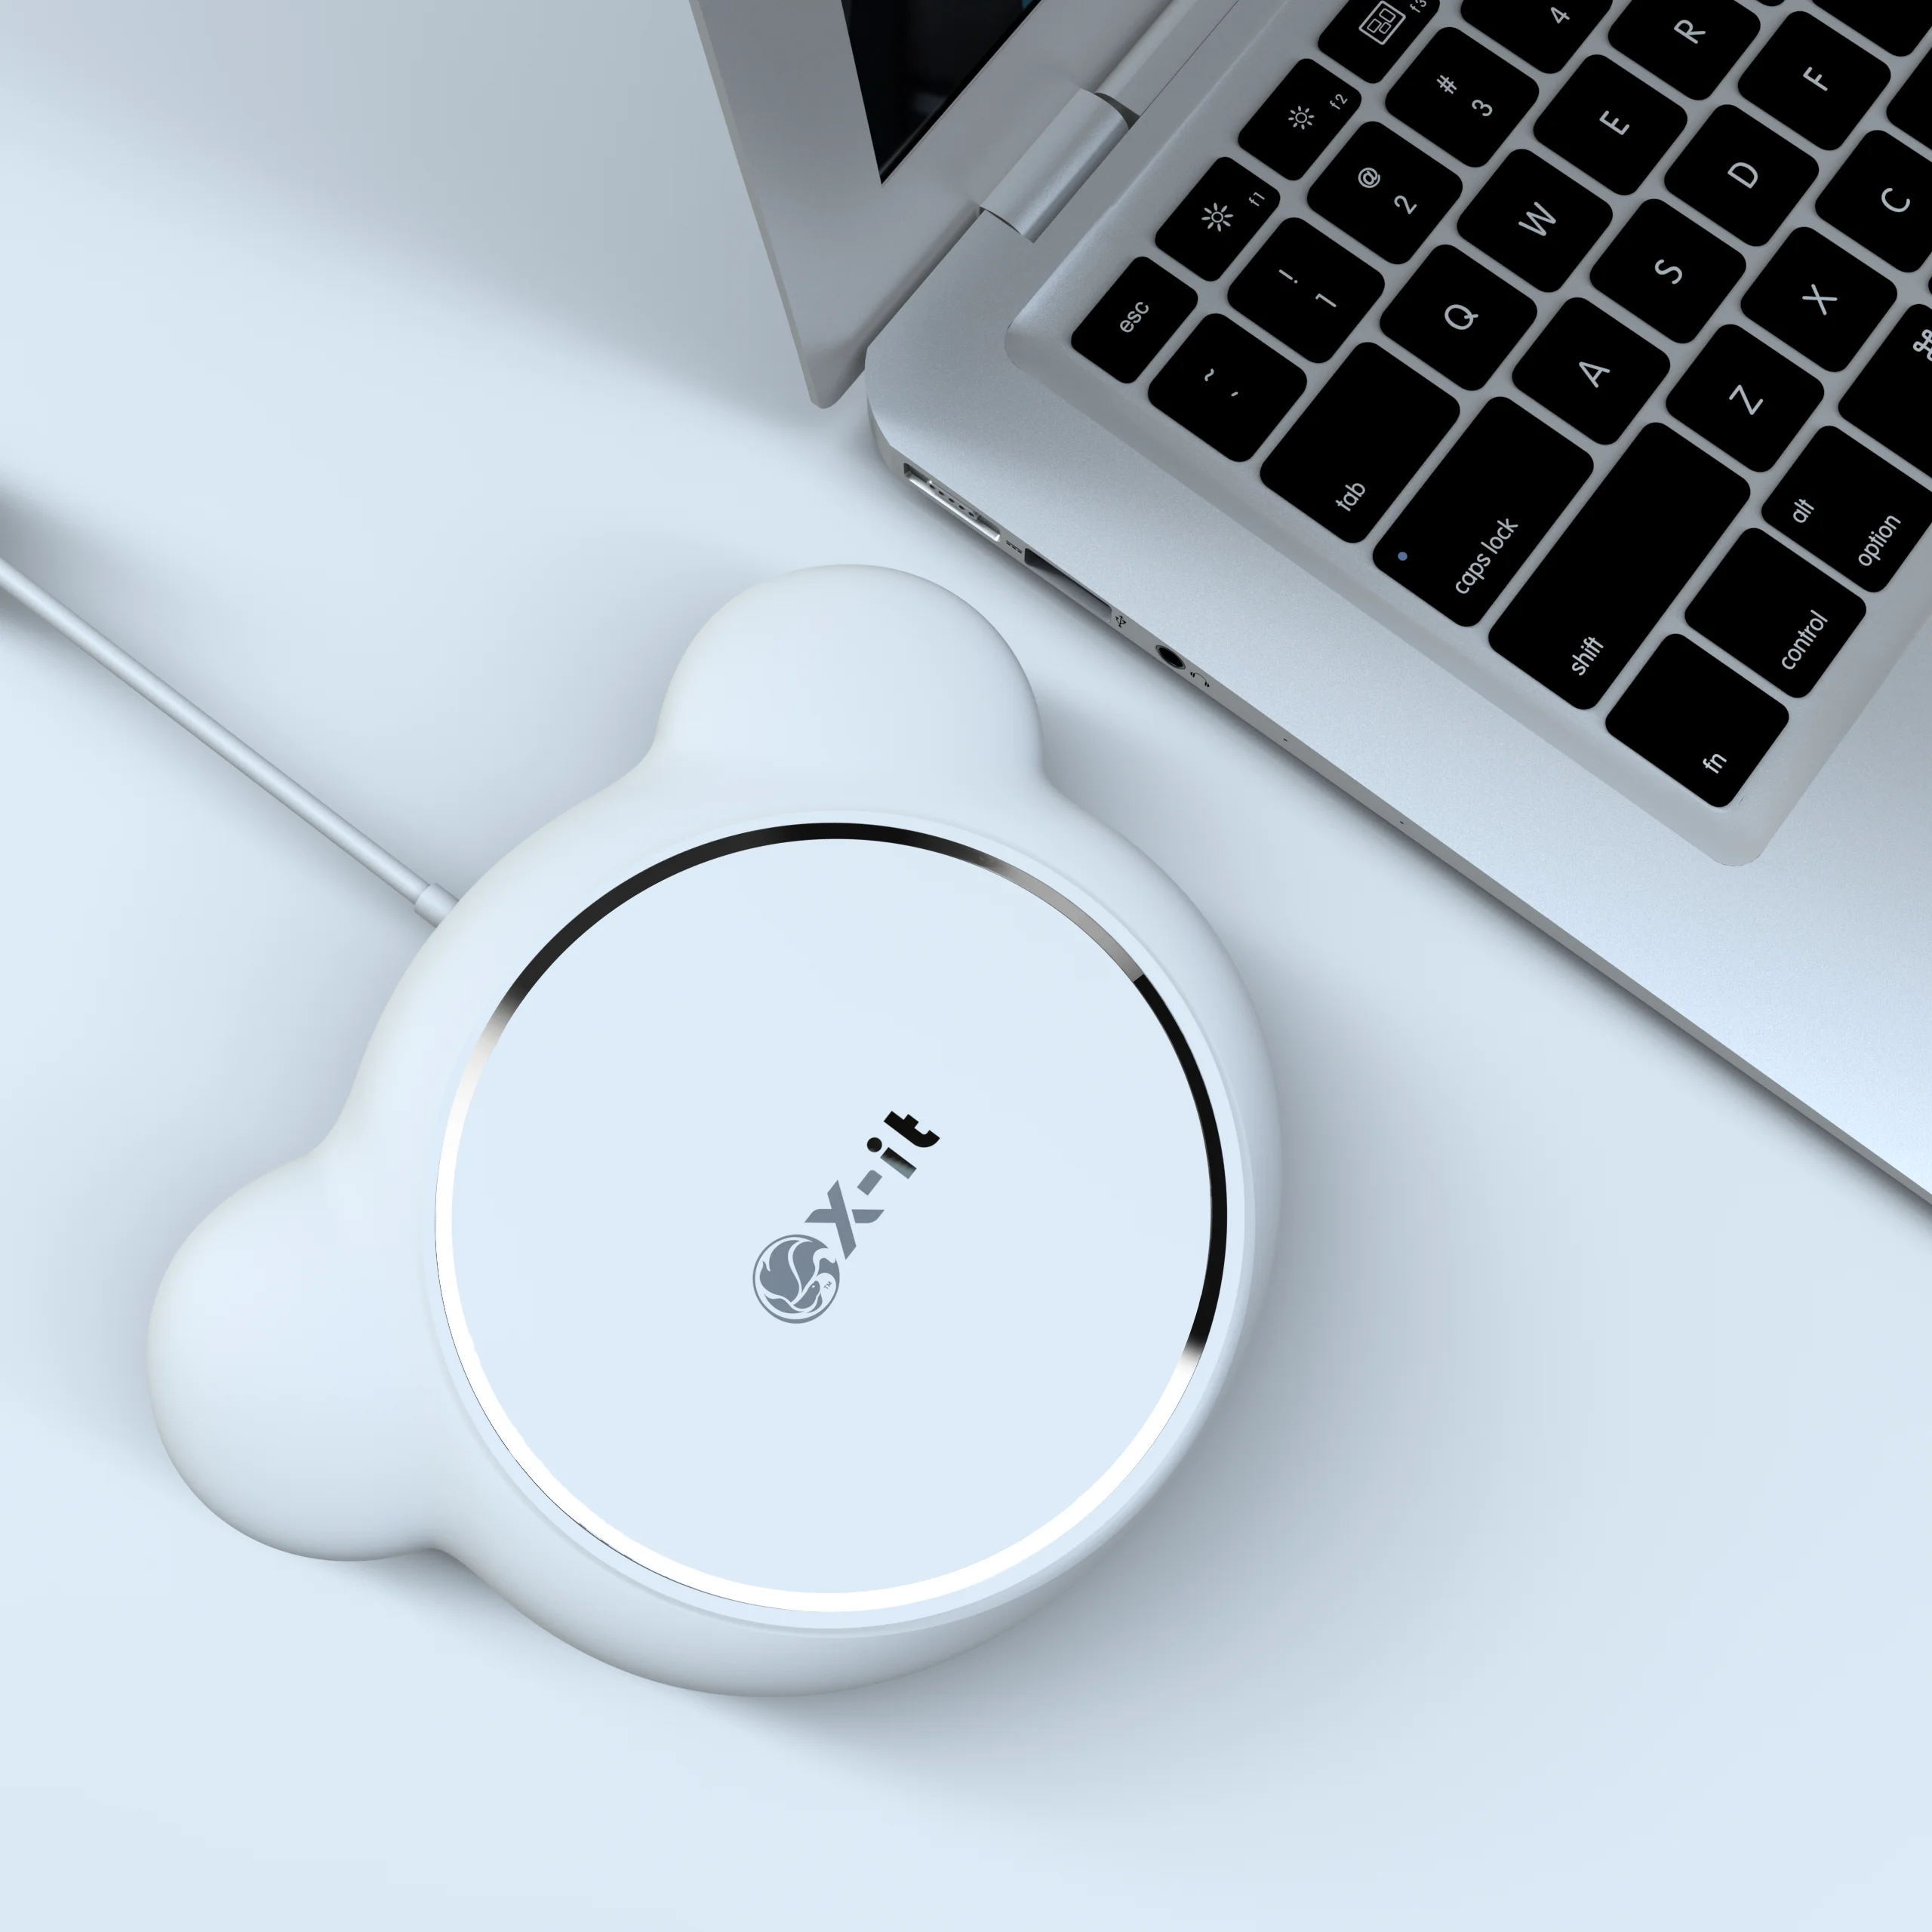 

Portable cute Product 2019 Ultra Thin Qi Certified Wireless Charger Fast Wireless Charging Pad 10W/7.5W/5W